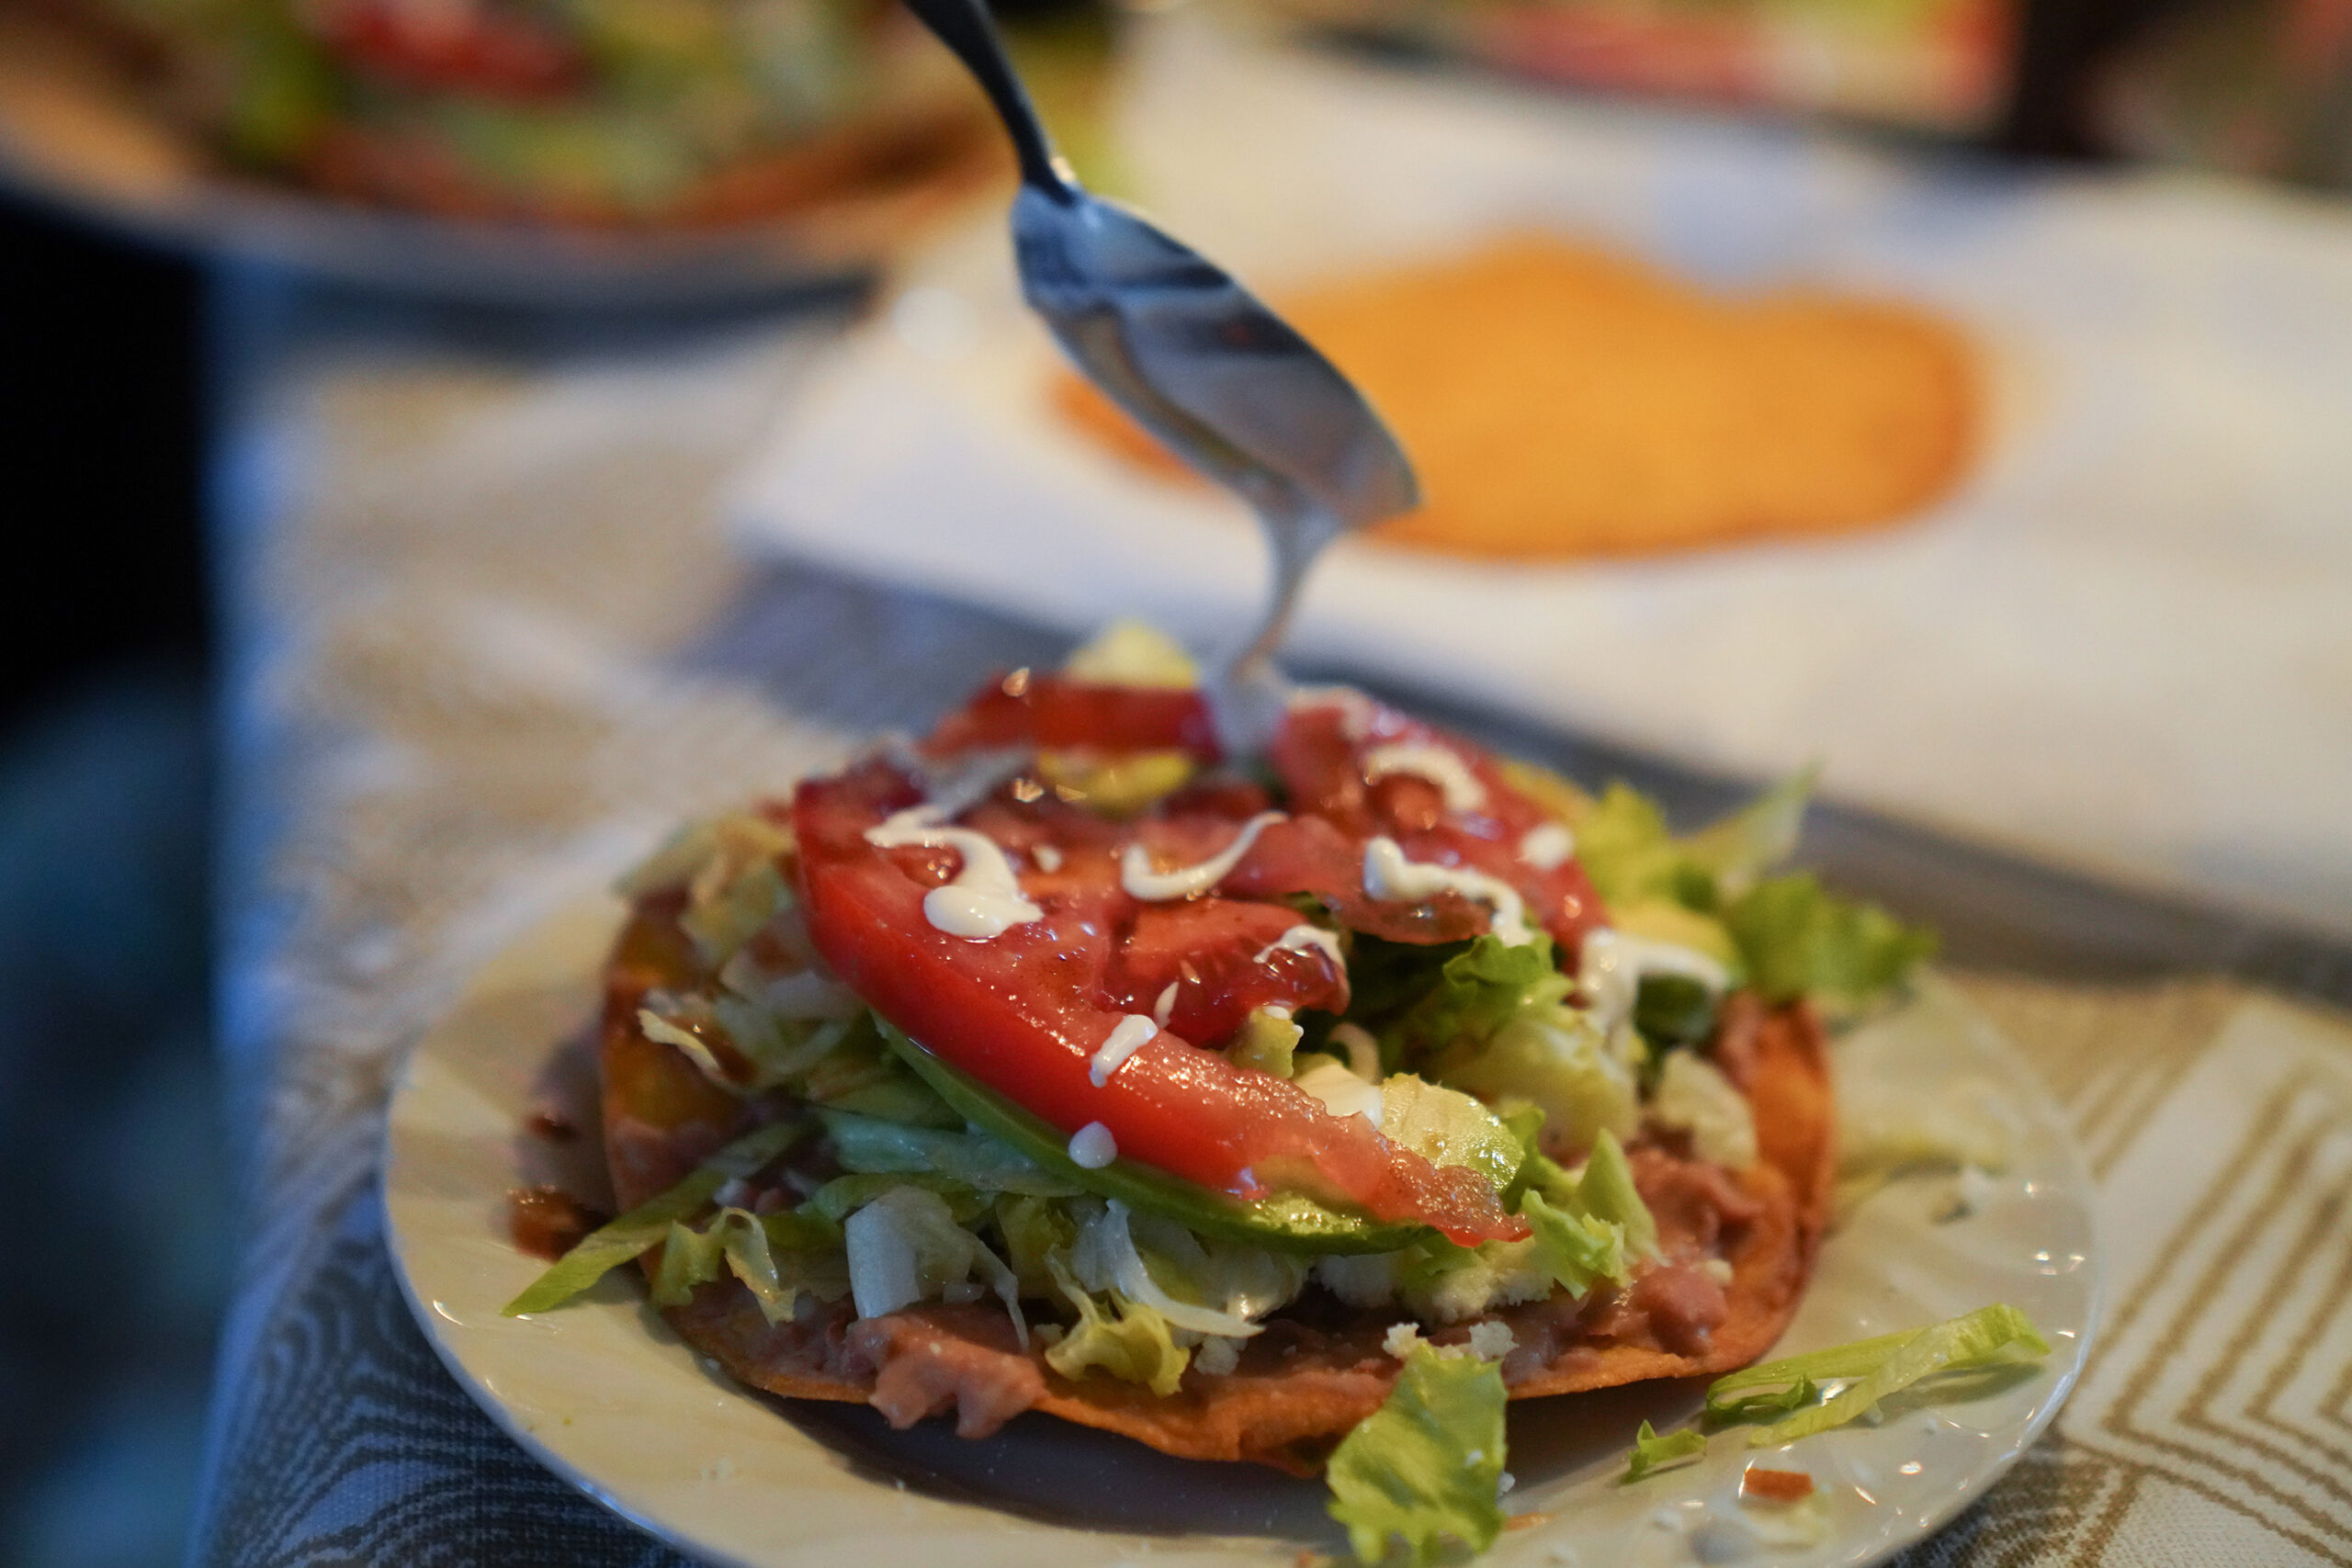 sour cream is drizzled over a tostada